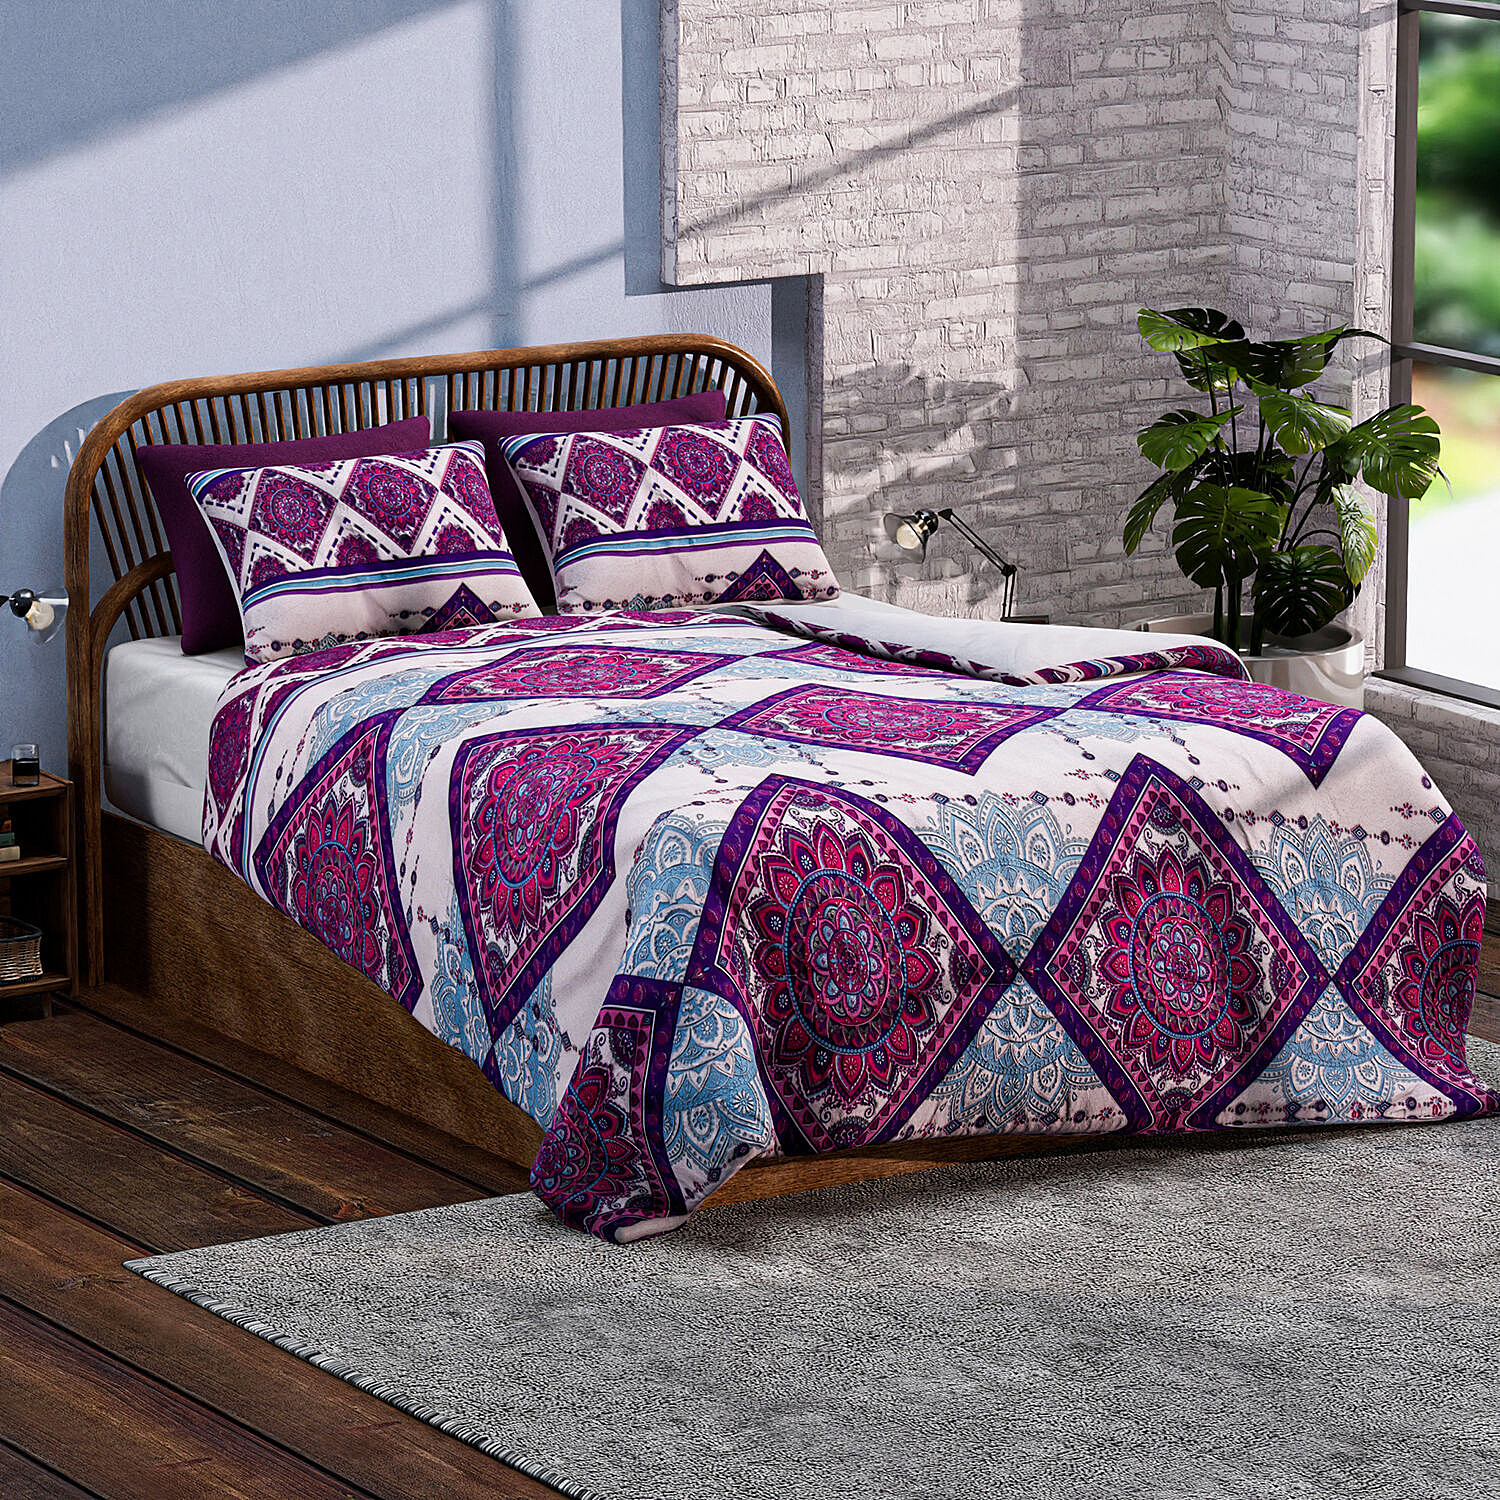 3-Piece-Set-Bohemian-Pattern-Comforter-with-2-Pillow-Cases-DoubleSize-